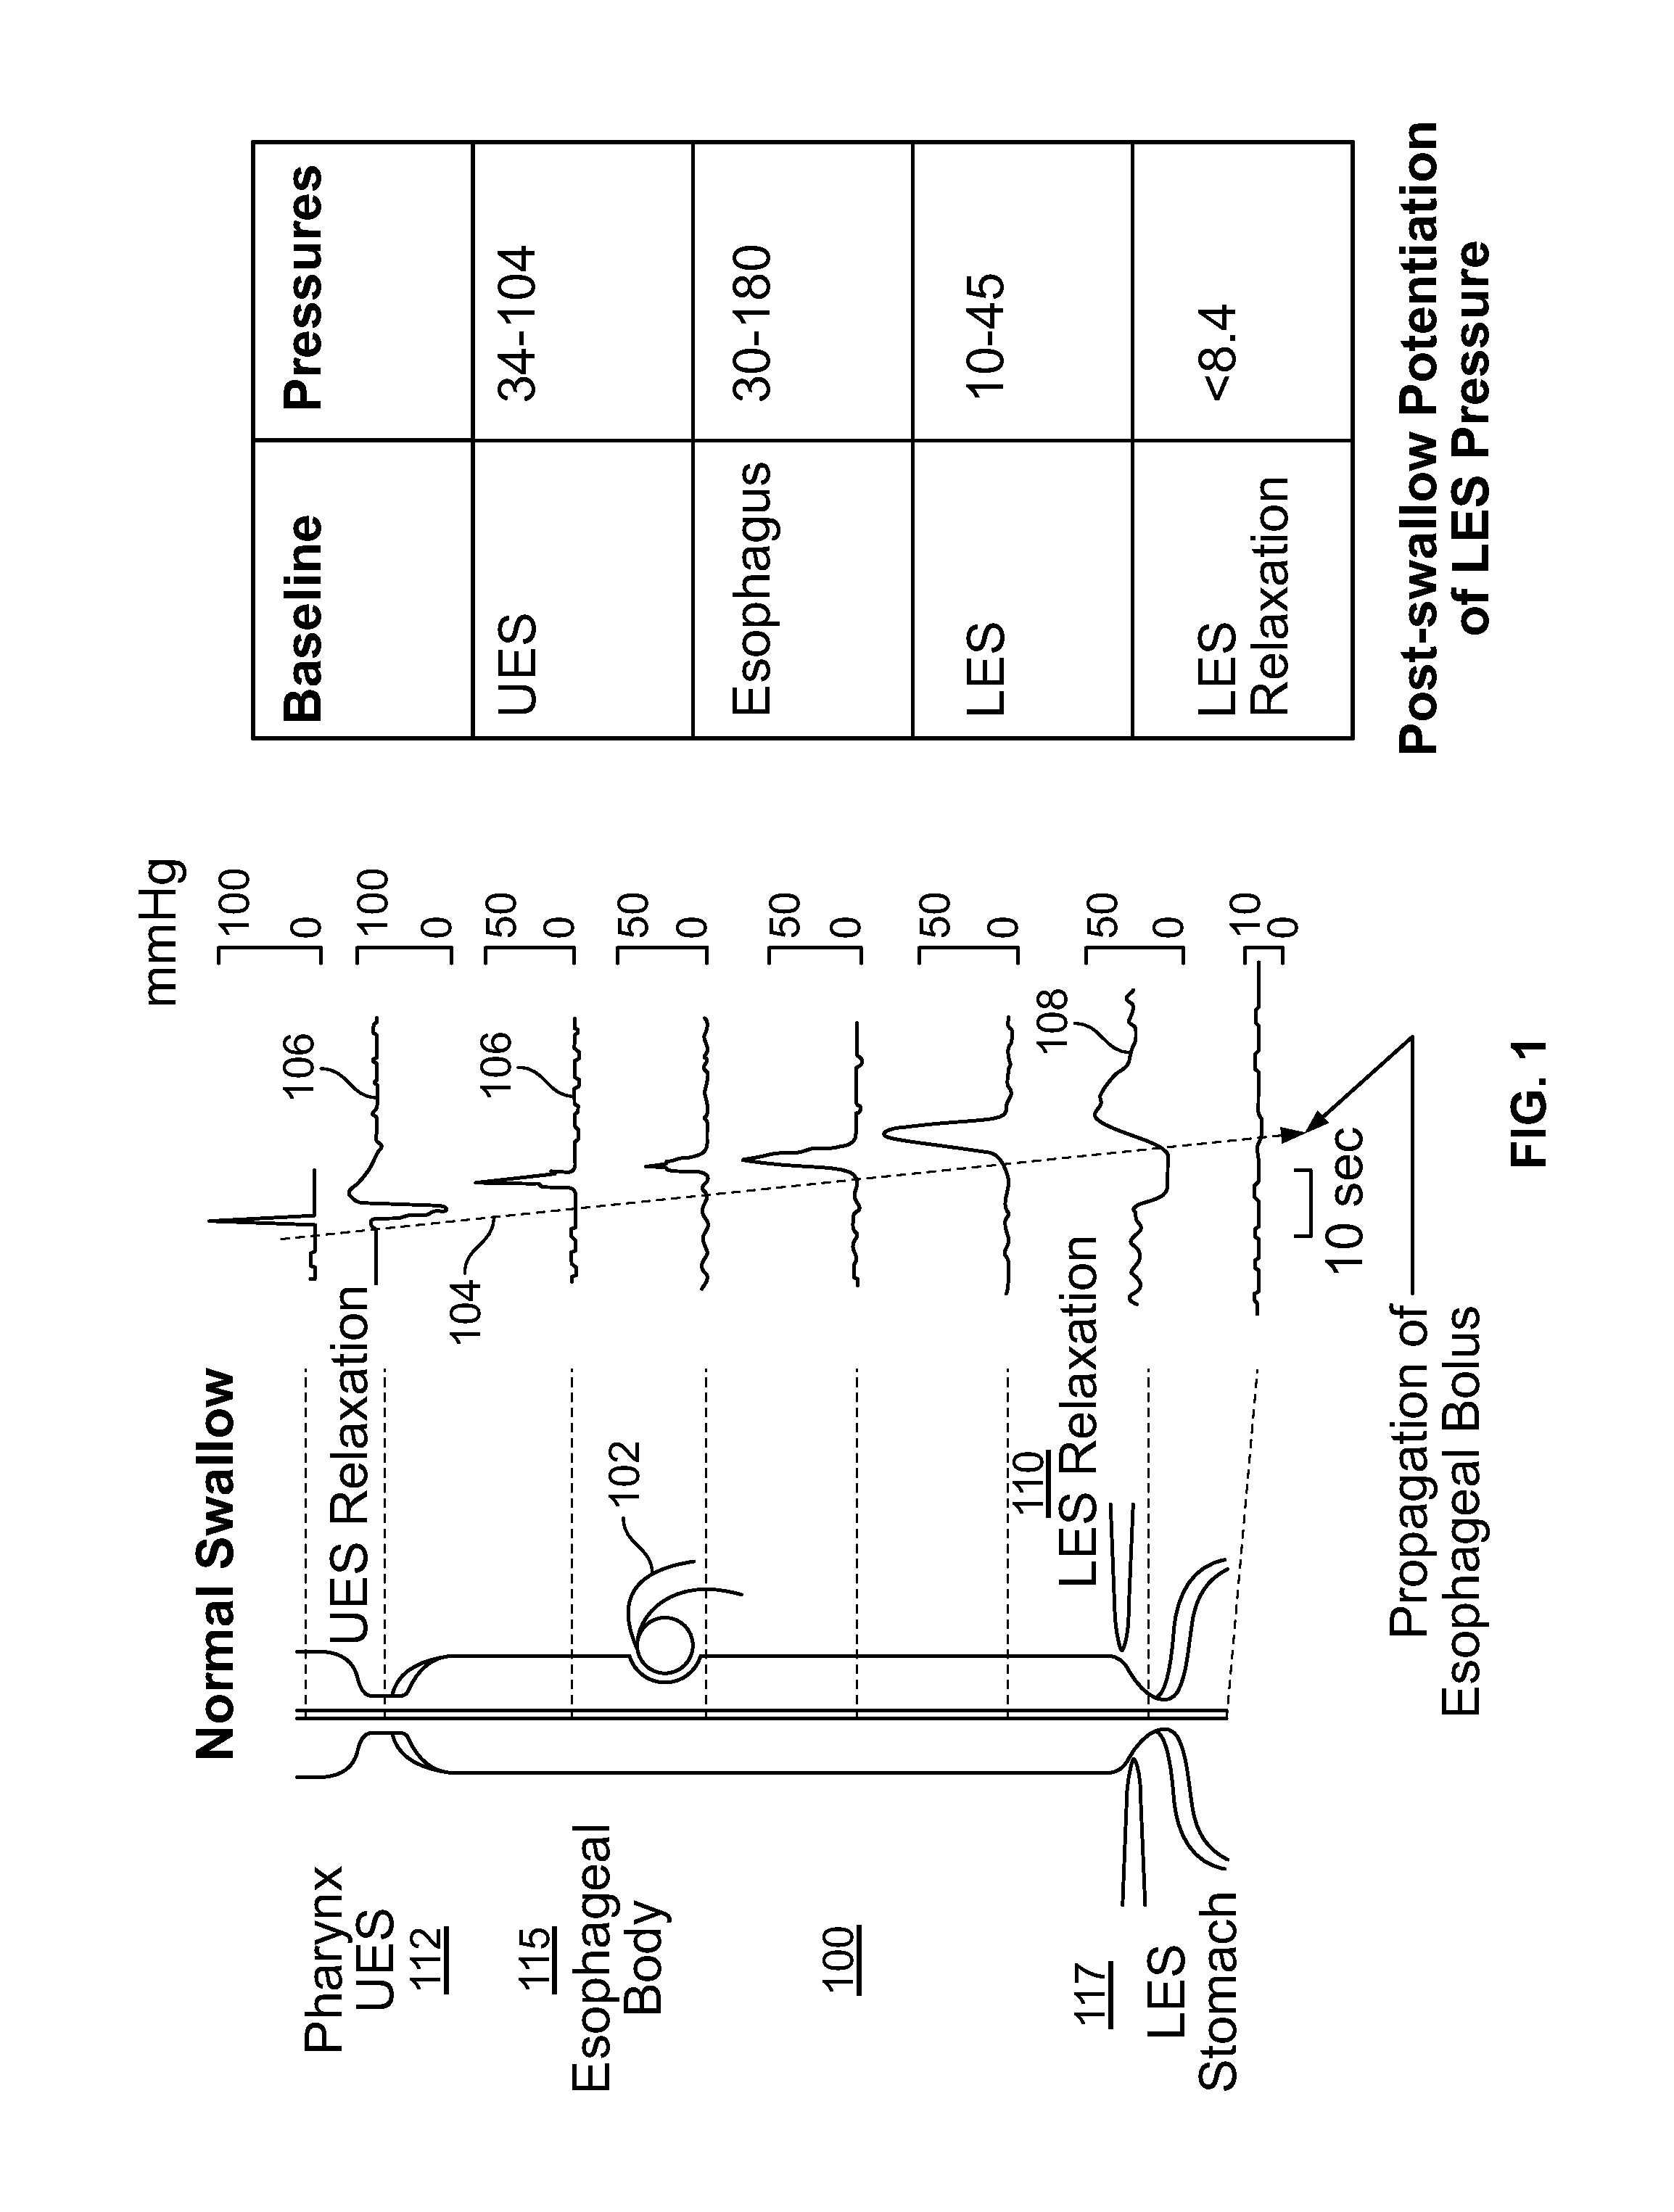 Device and Implantation System for Electrical Stimulation of Biological Systems